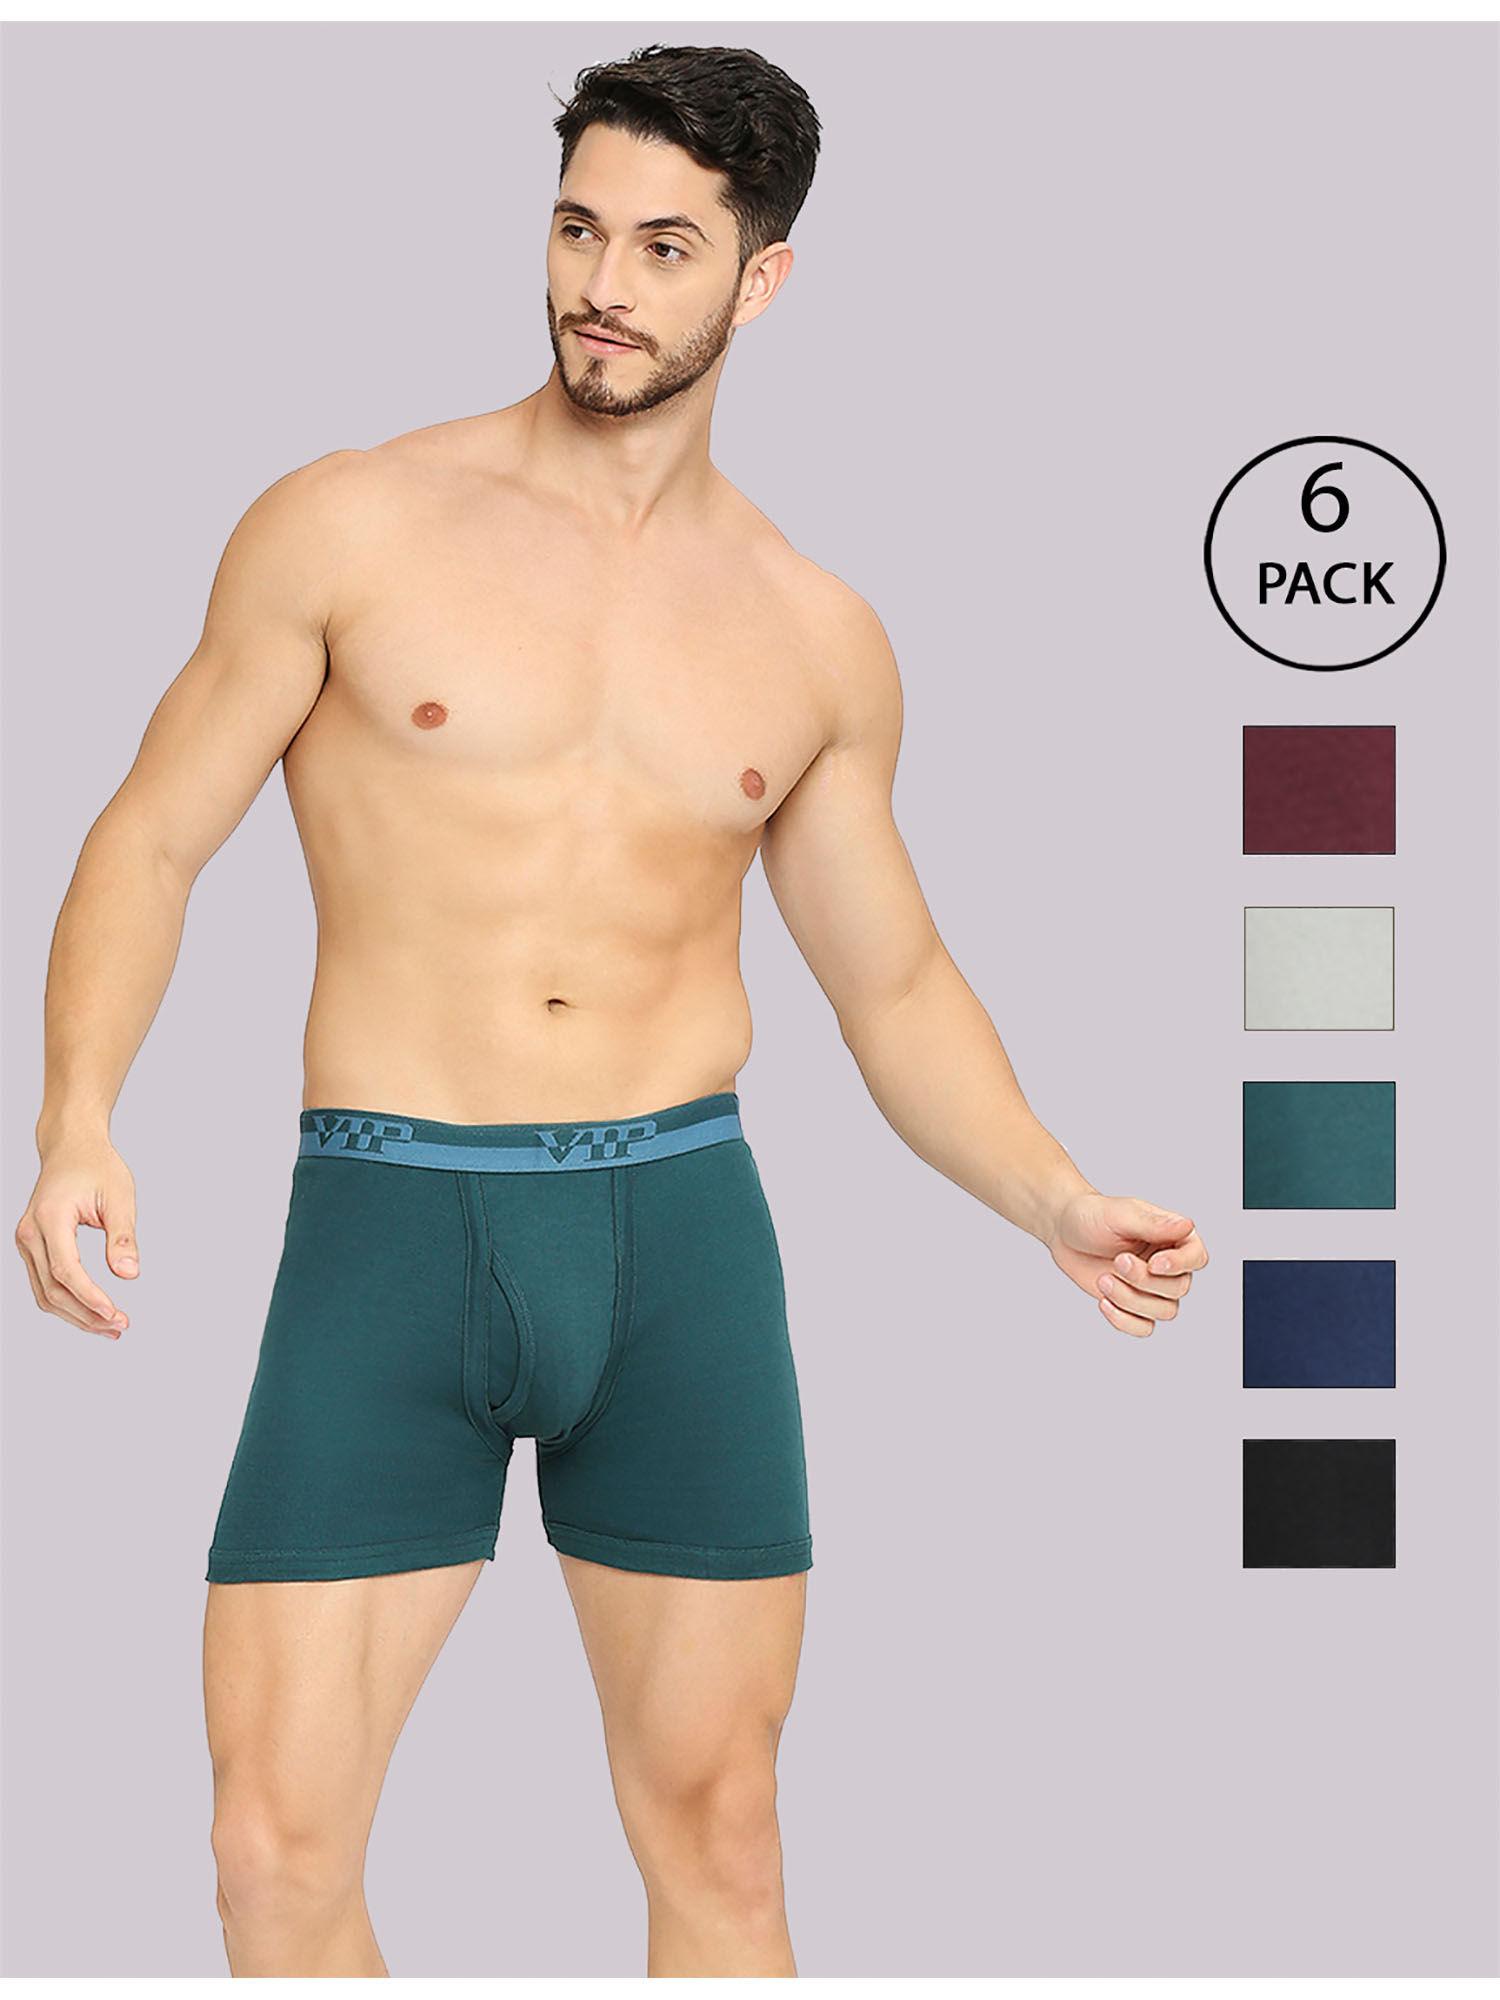 ultra men's essential cotton trunks in assorted colors (pack of 6)